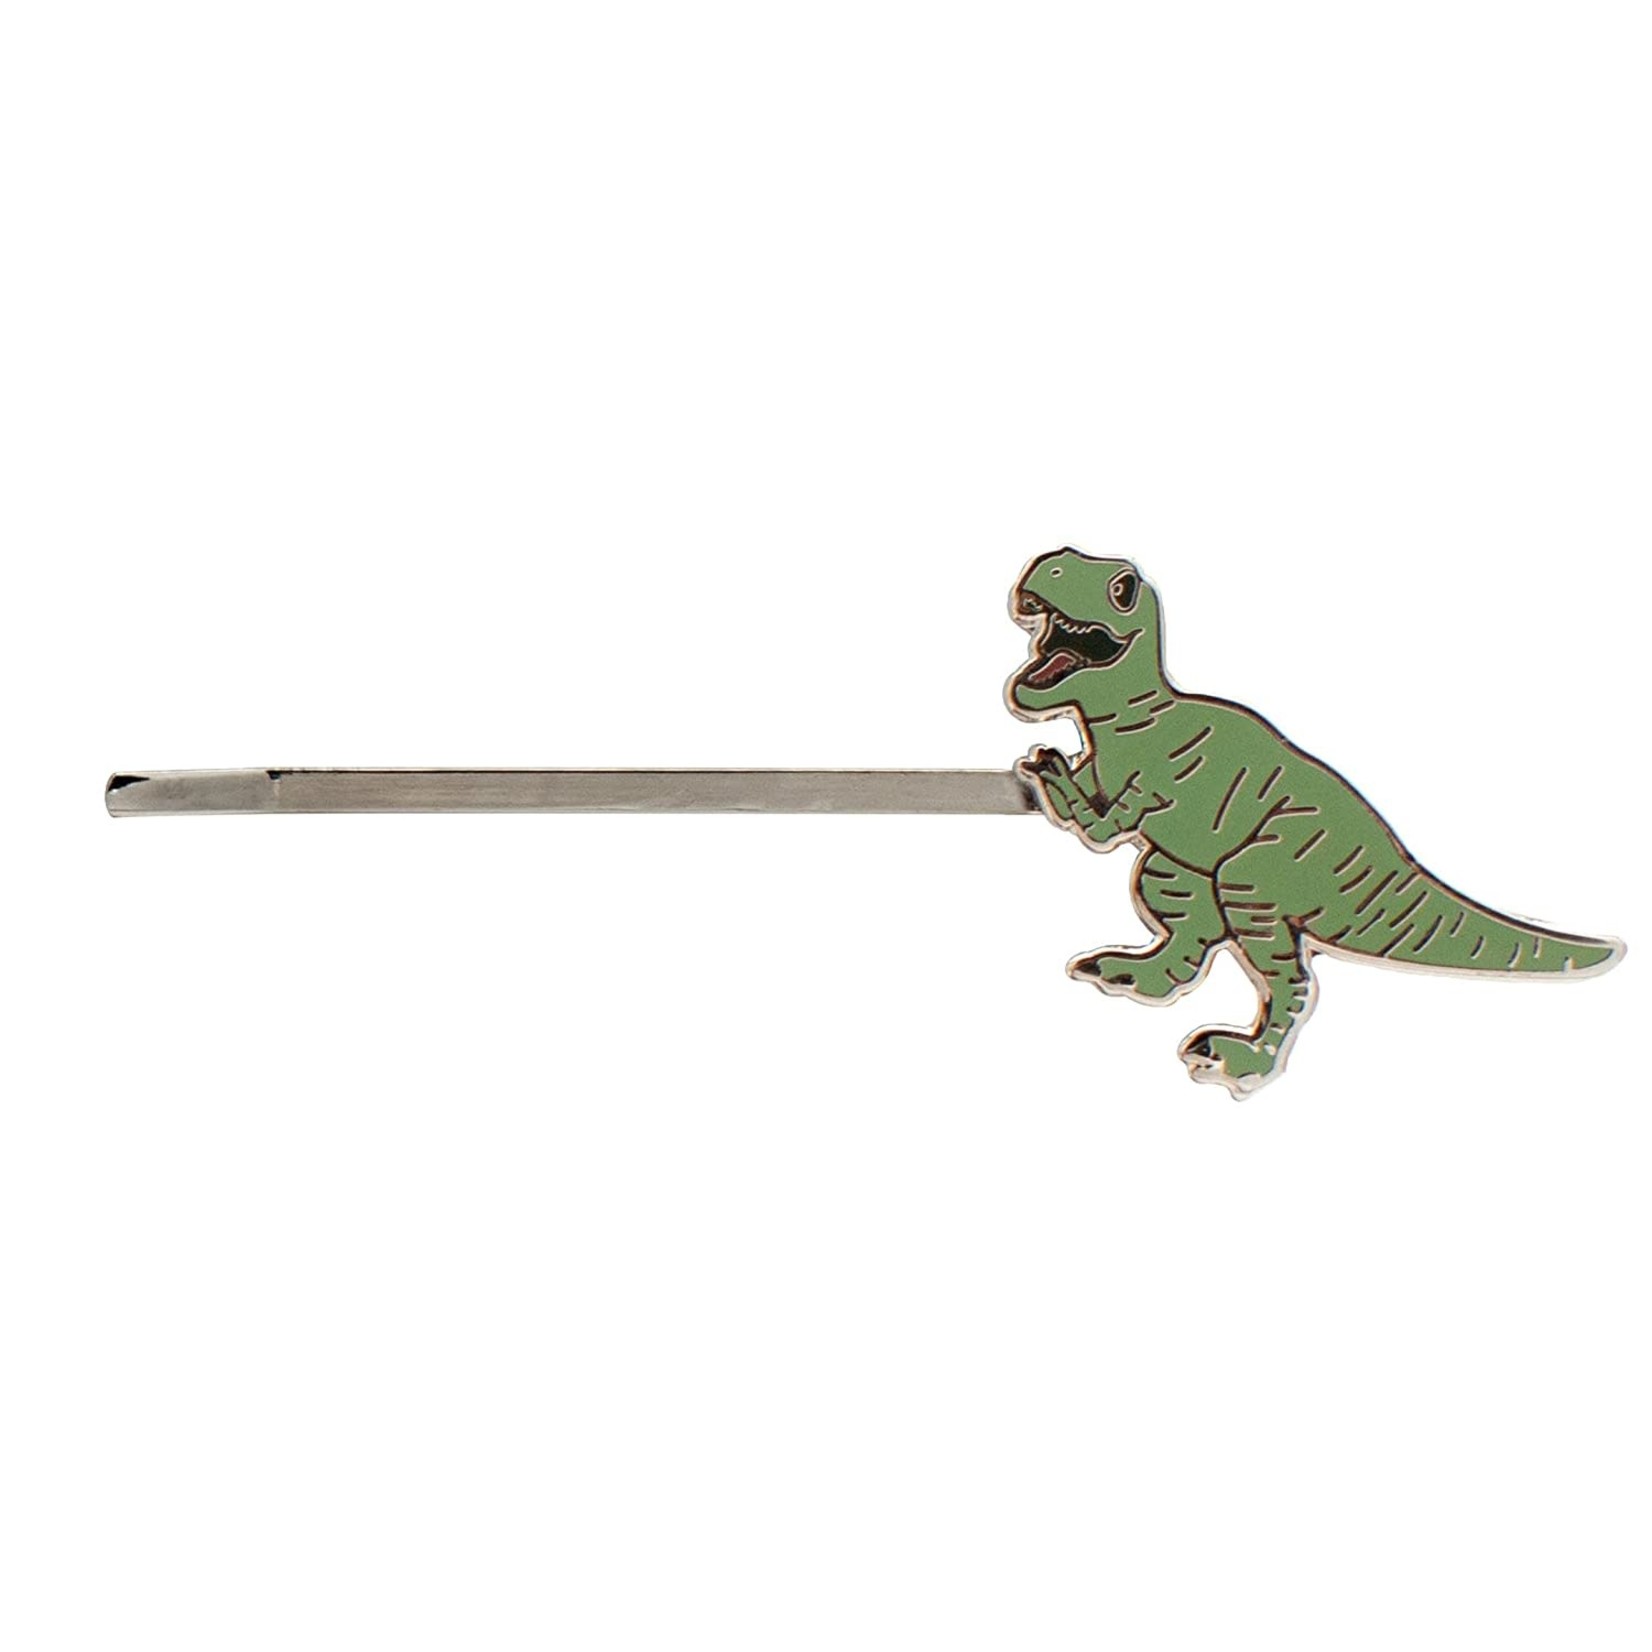 The Unemployed Philosophers Guild Hair Pins: Dinosaurs